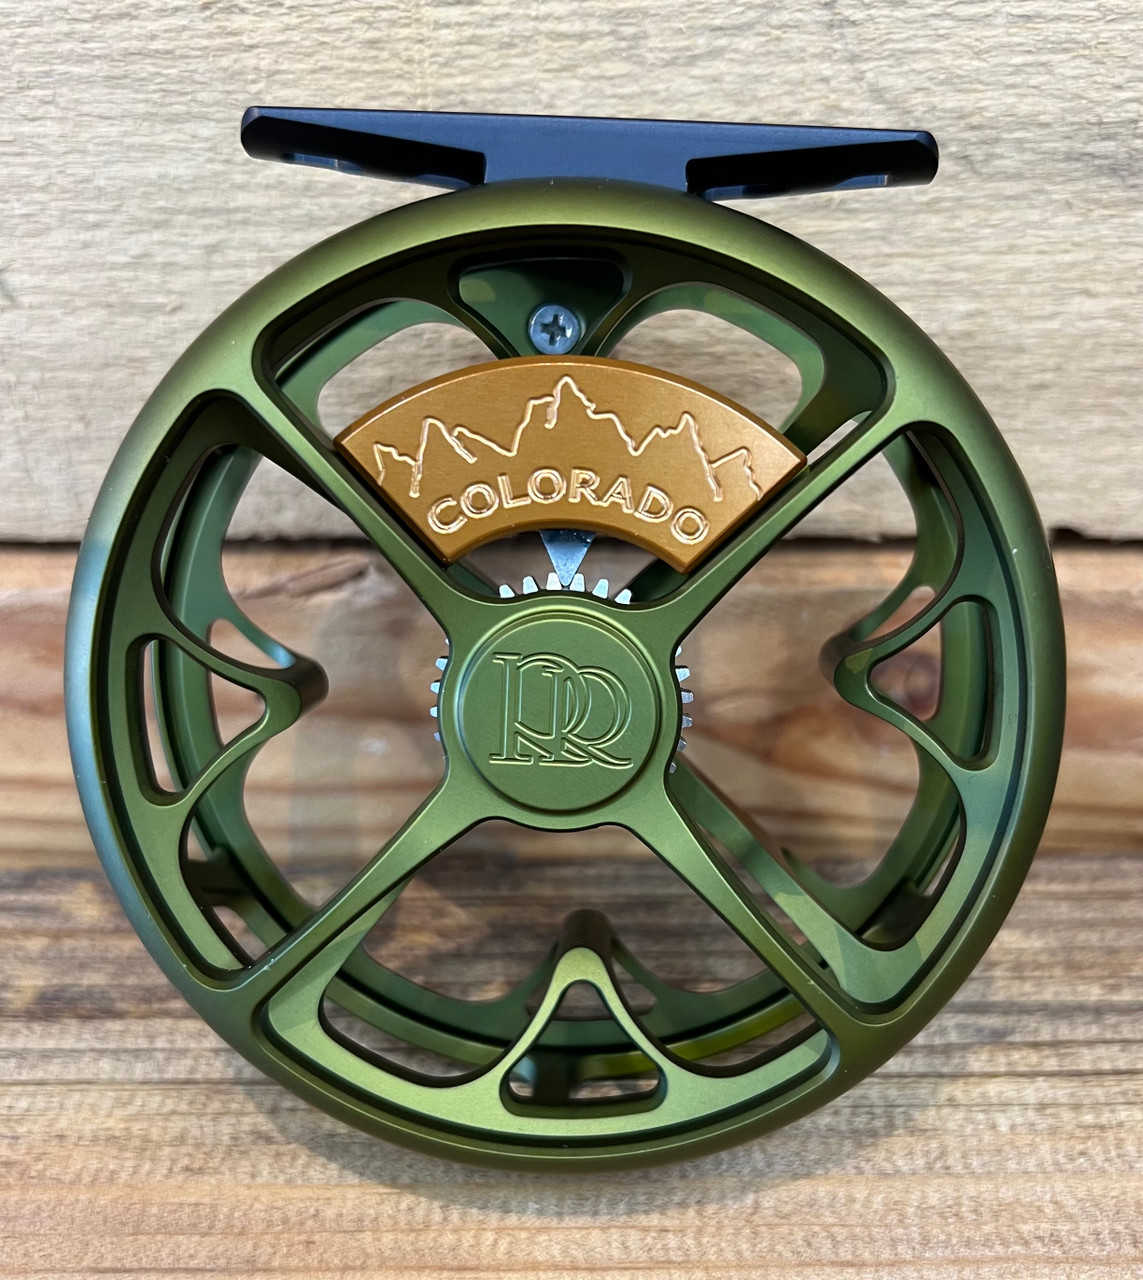 Ross Colorado Fly Reel - 4/5 WT - Matte Olive - Made in USA - Ed's